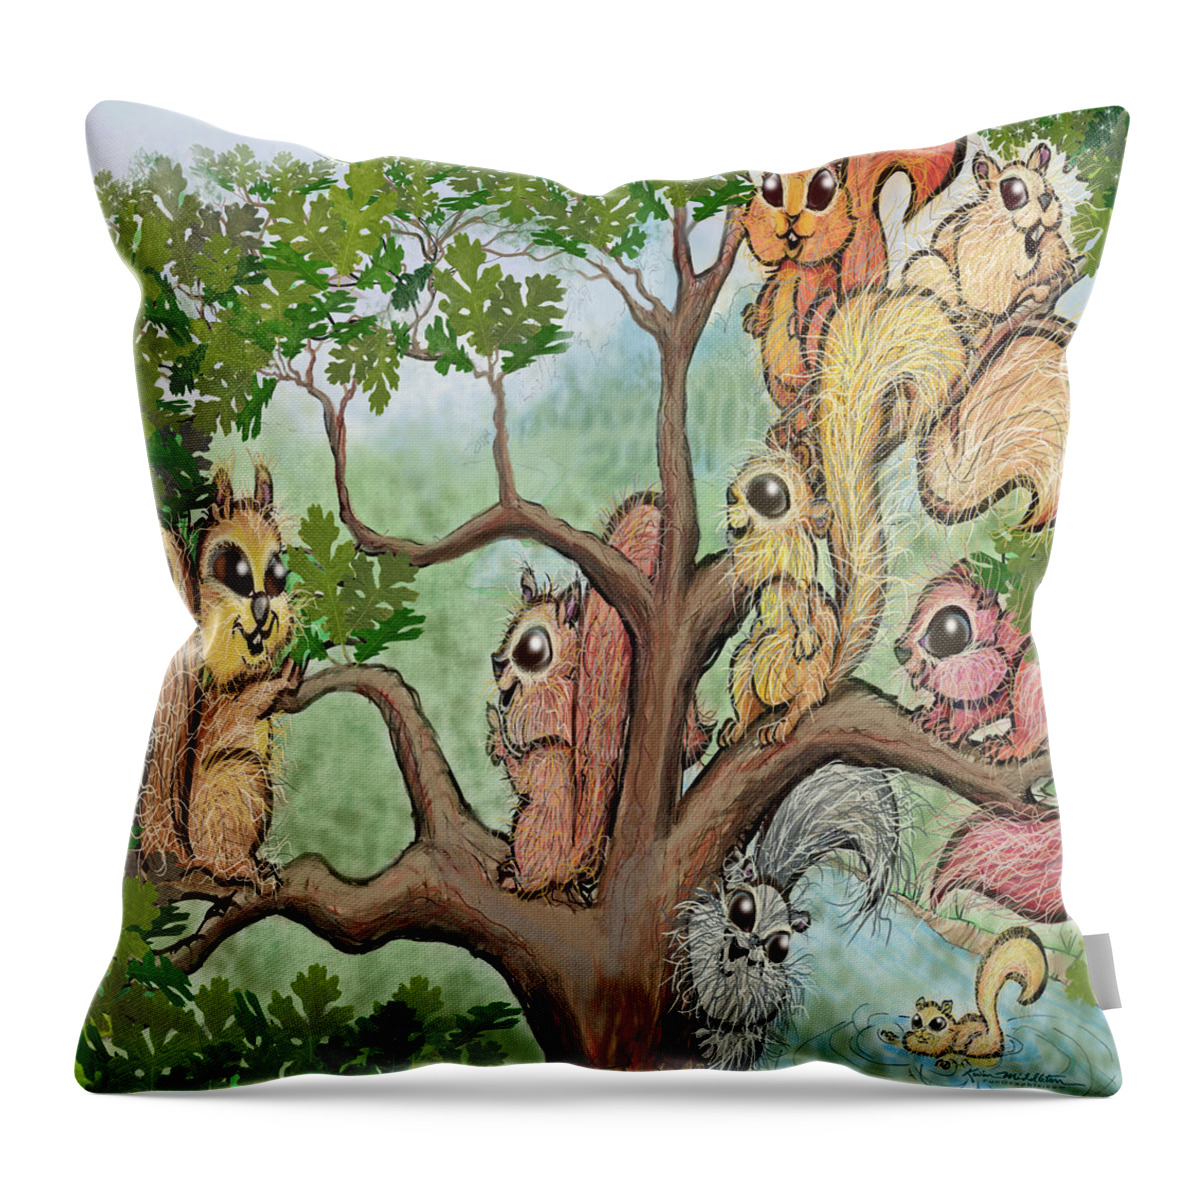 Squirrel Throw Pillow featuring the digital art Squirrels by Kevin Middleton